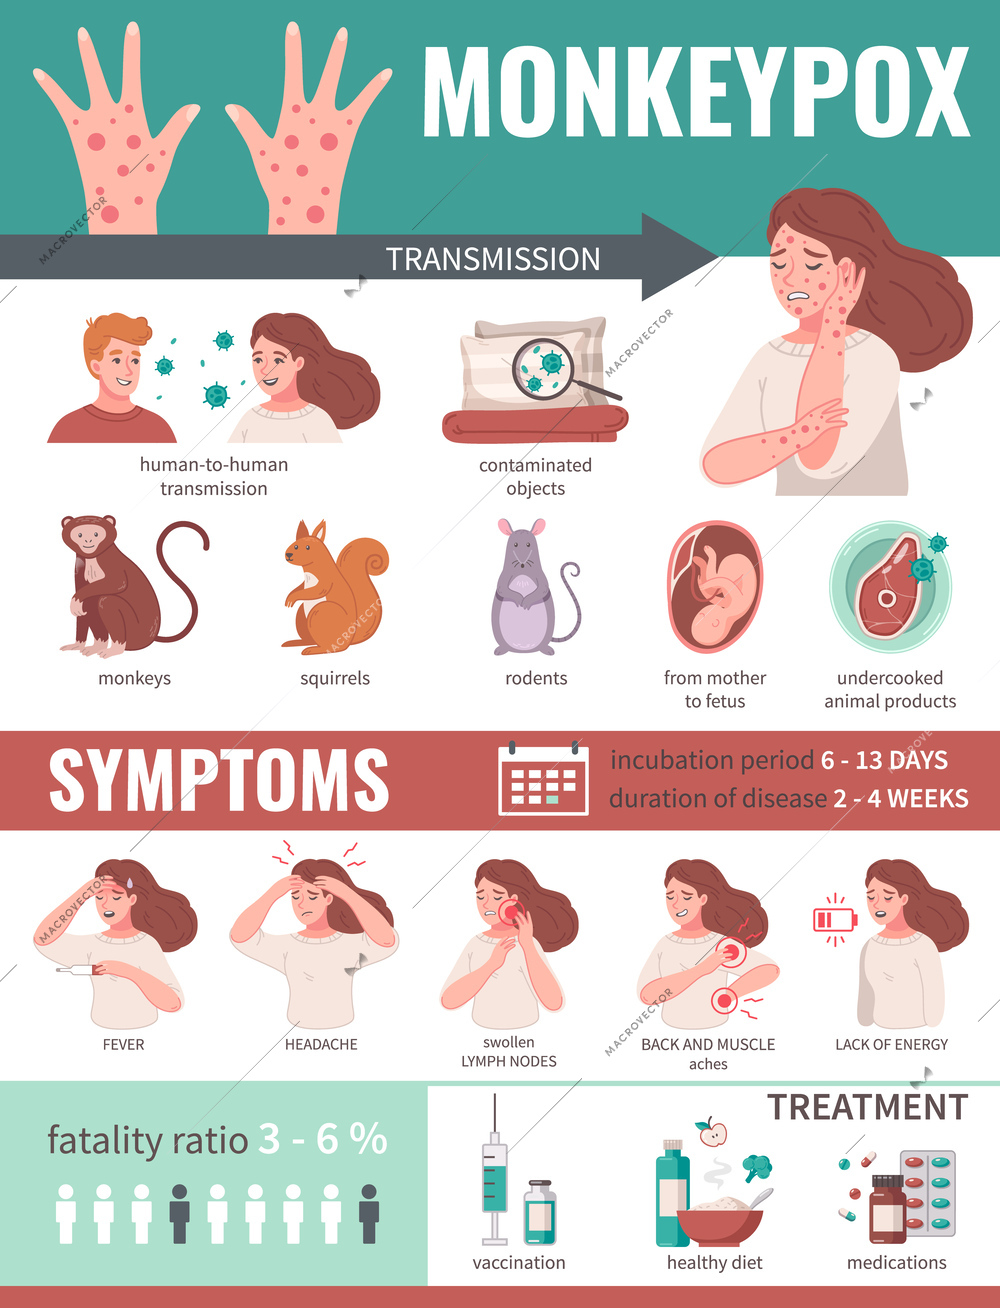 Monkey pox virus infographics with transmission ways and symptoms vector illustration